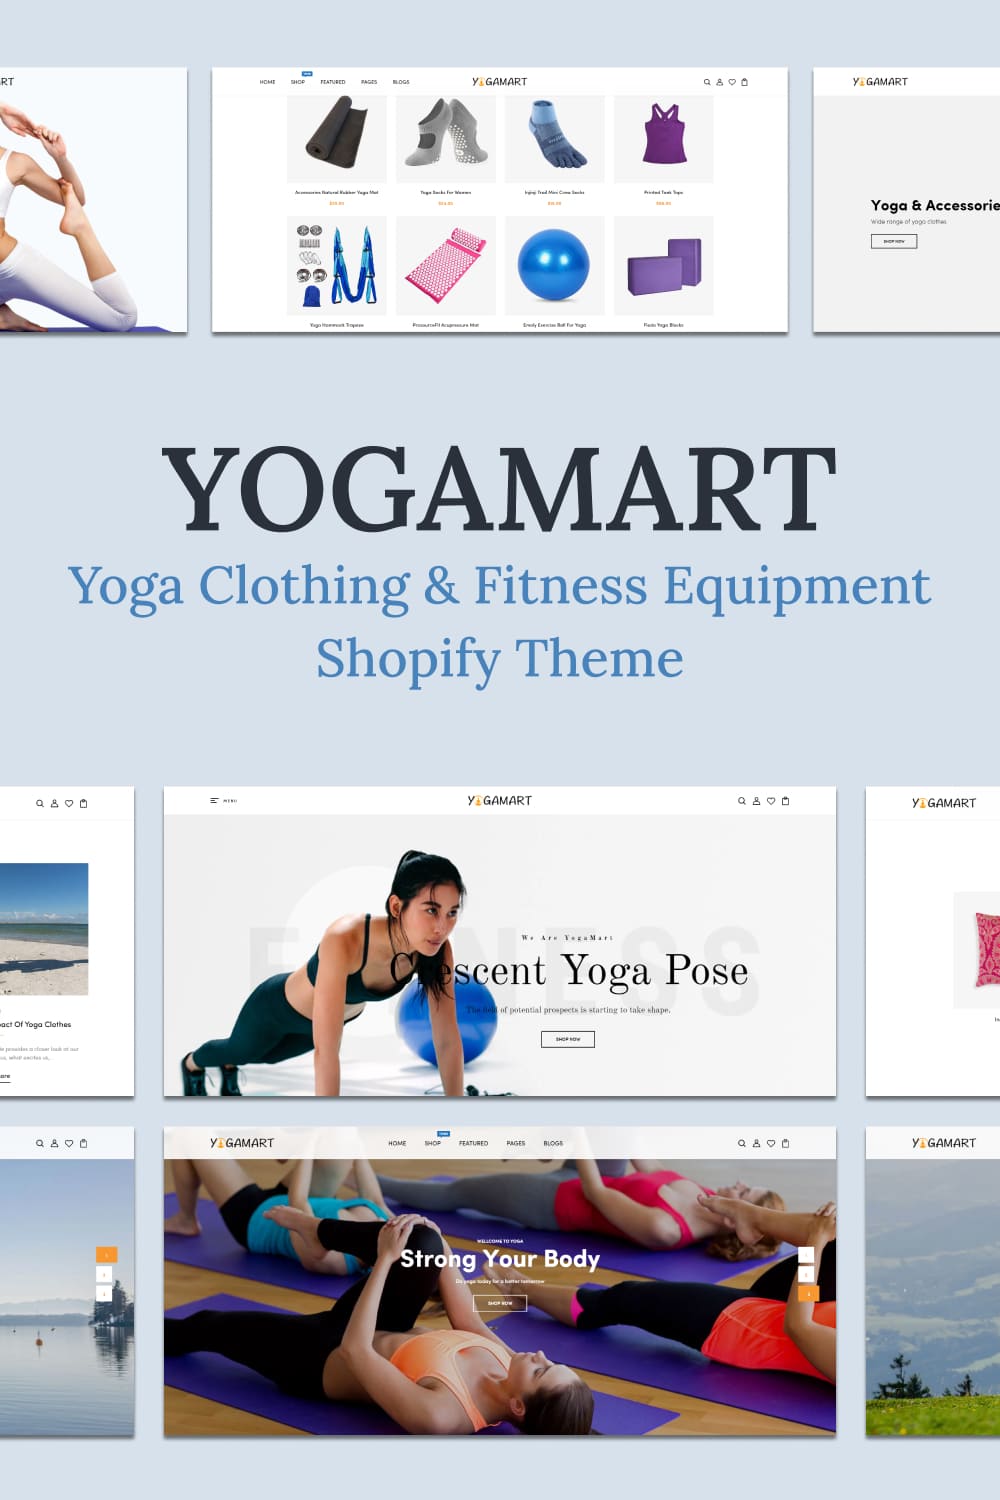 Strong your body with YogaMart - Yoga Clothing & Fitness Equipment Shopify Theme.